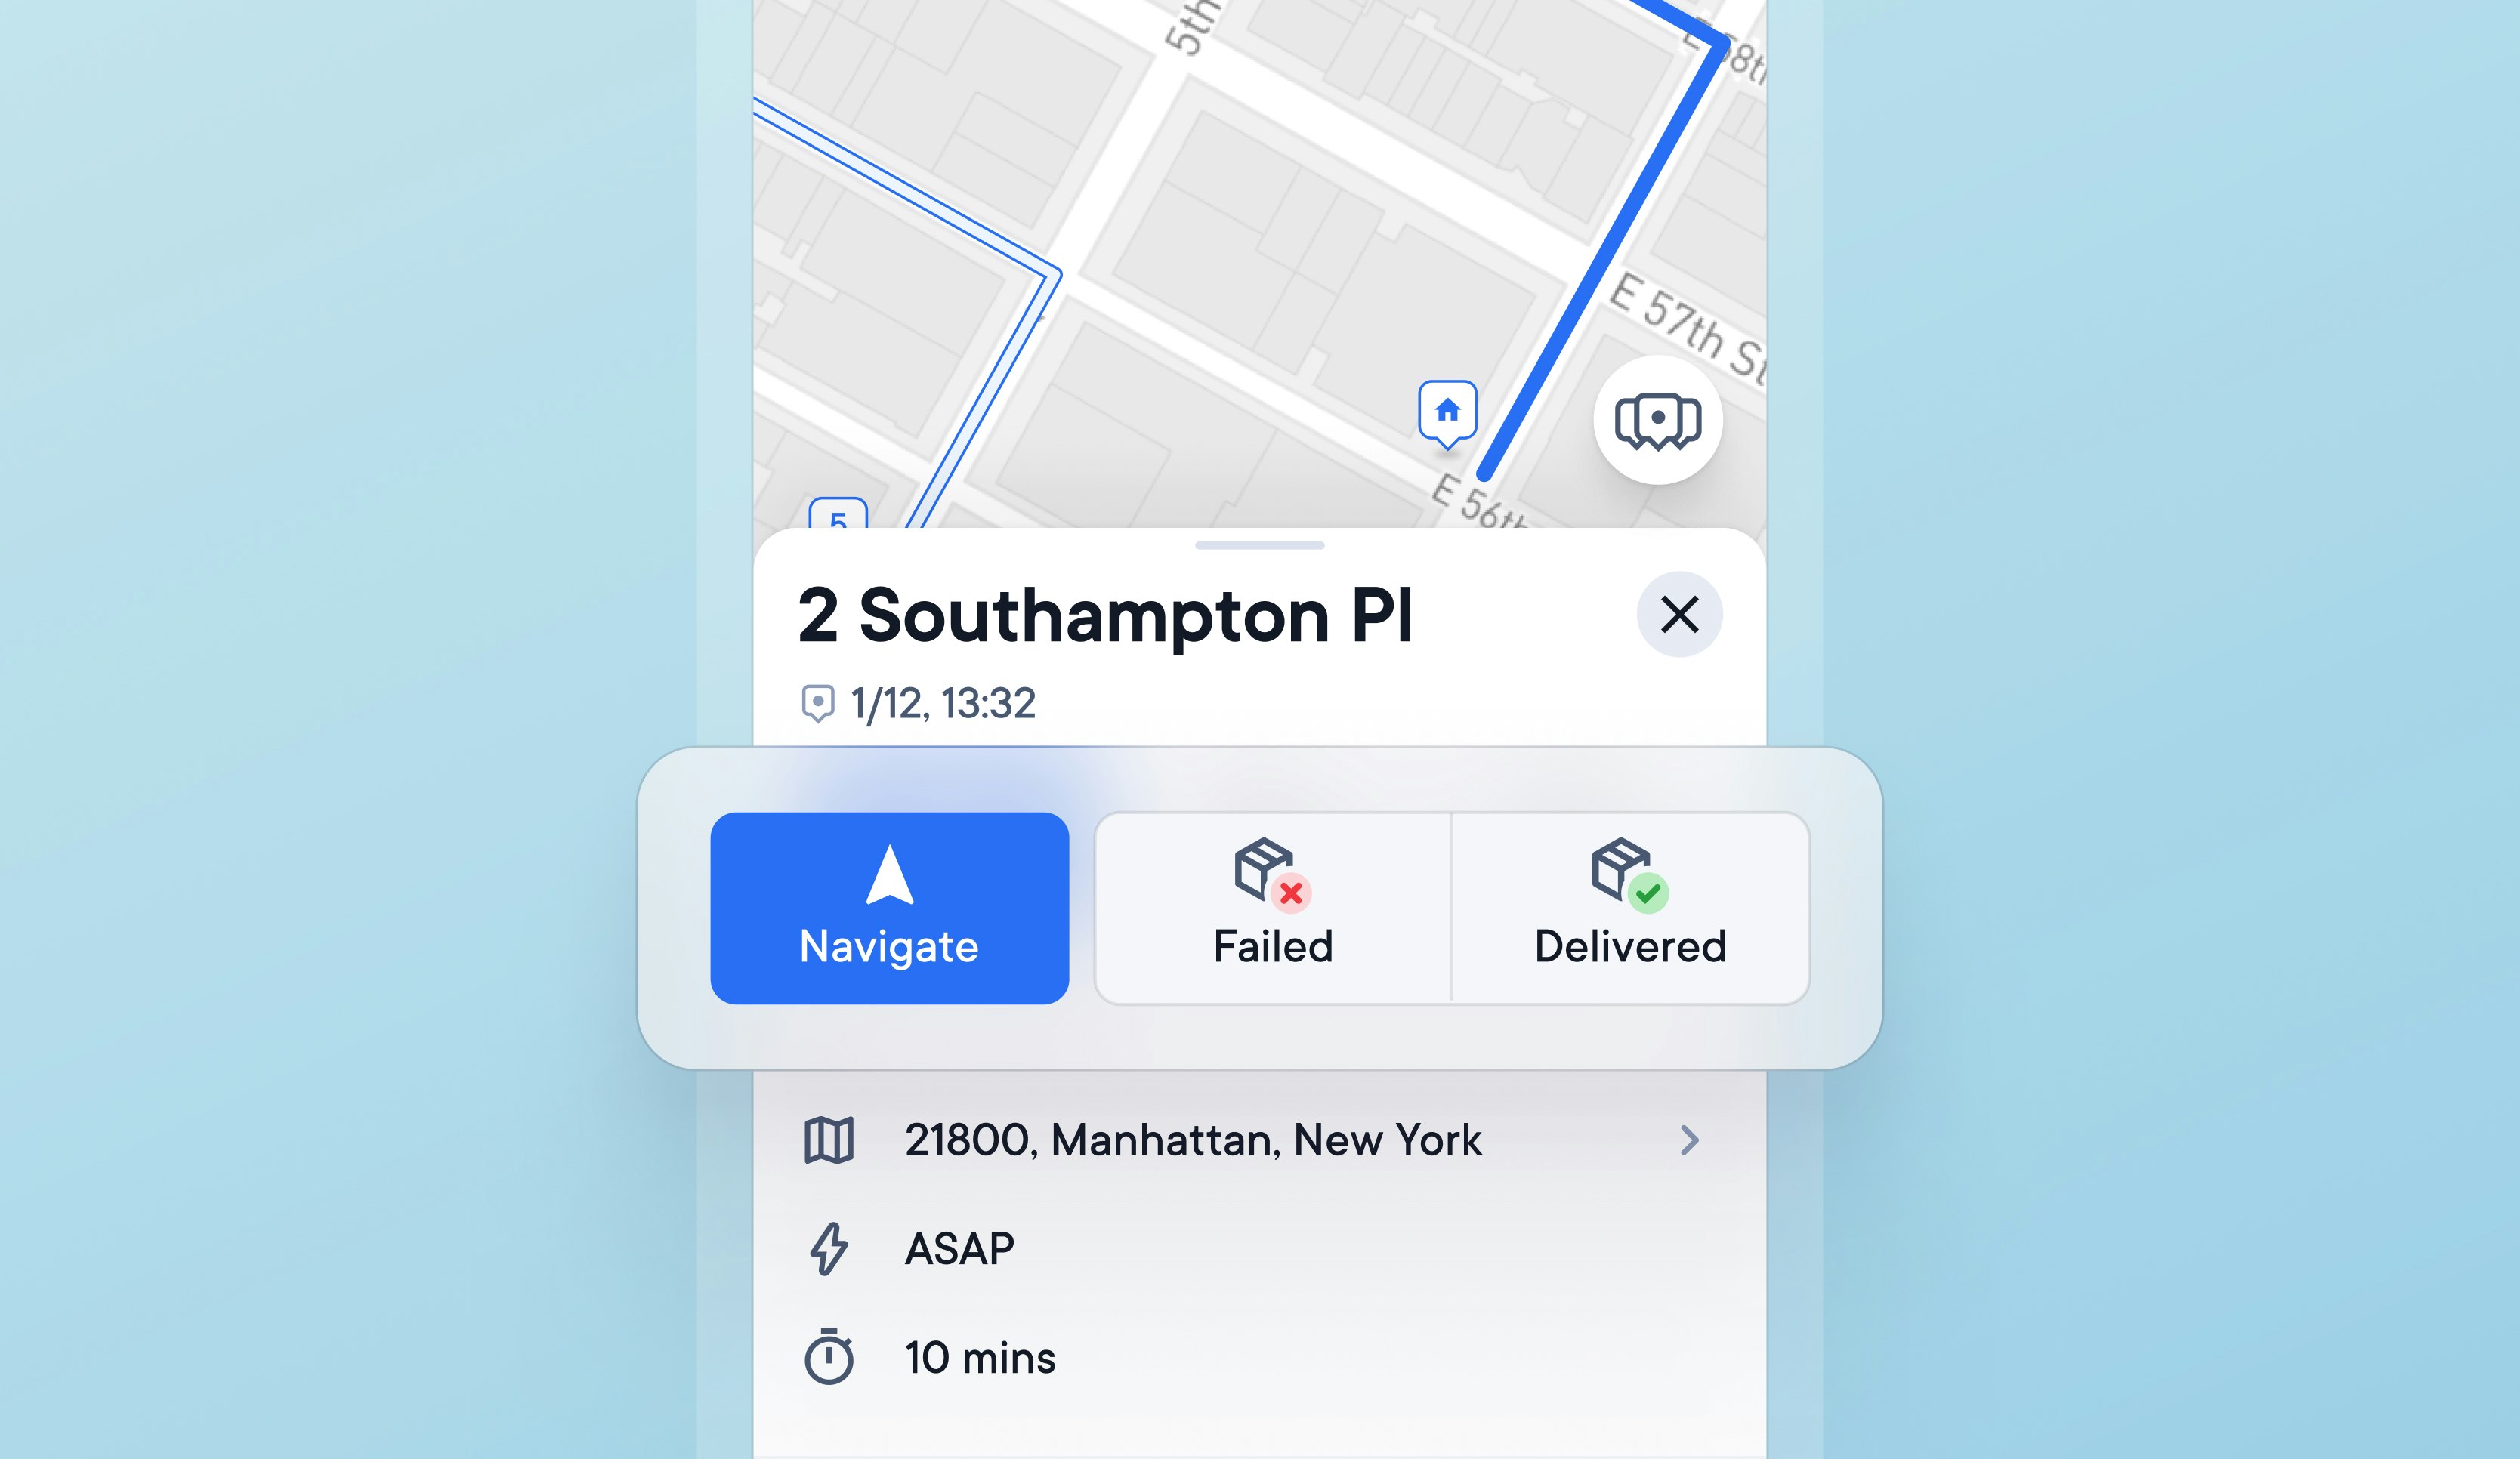 Easy to use route planning app